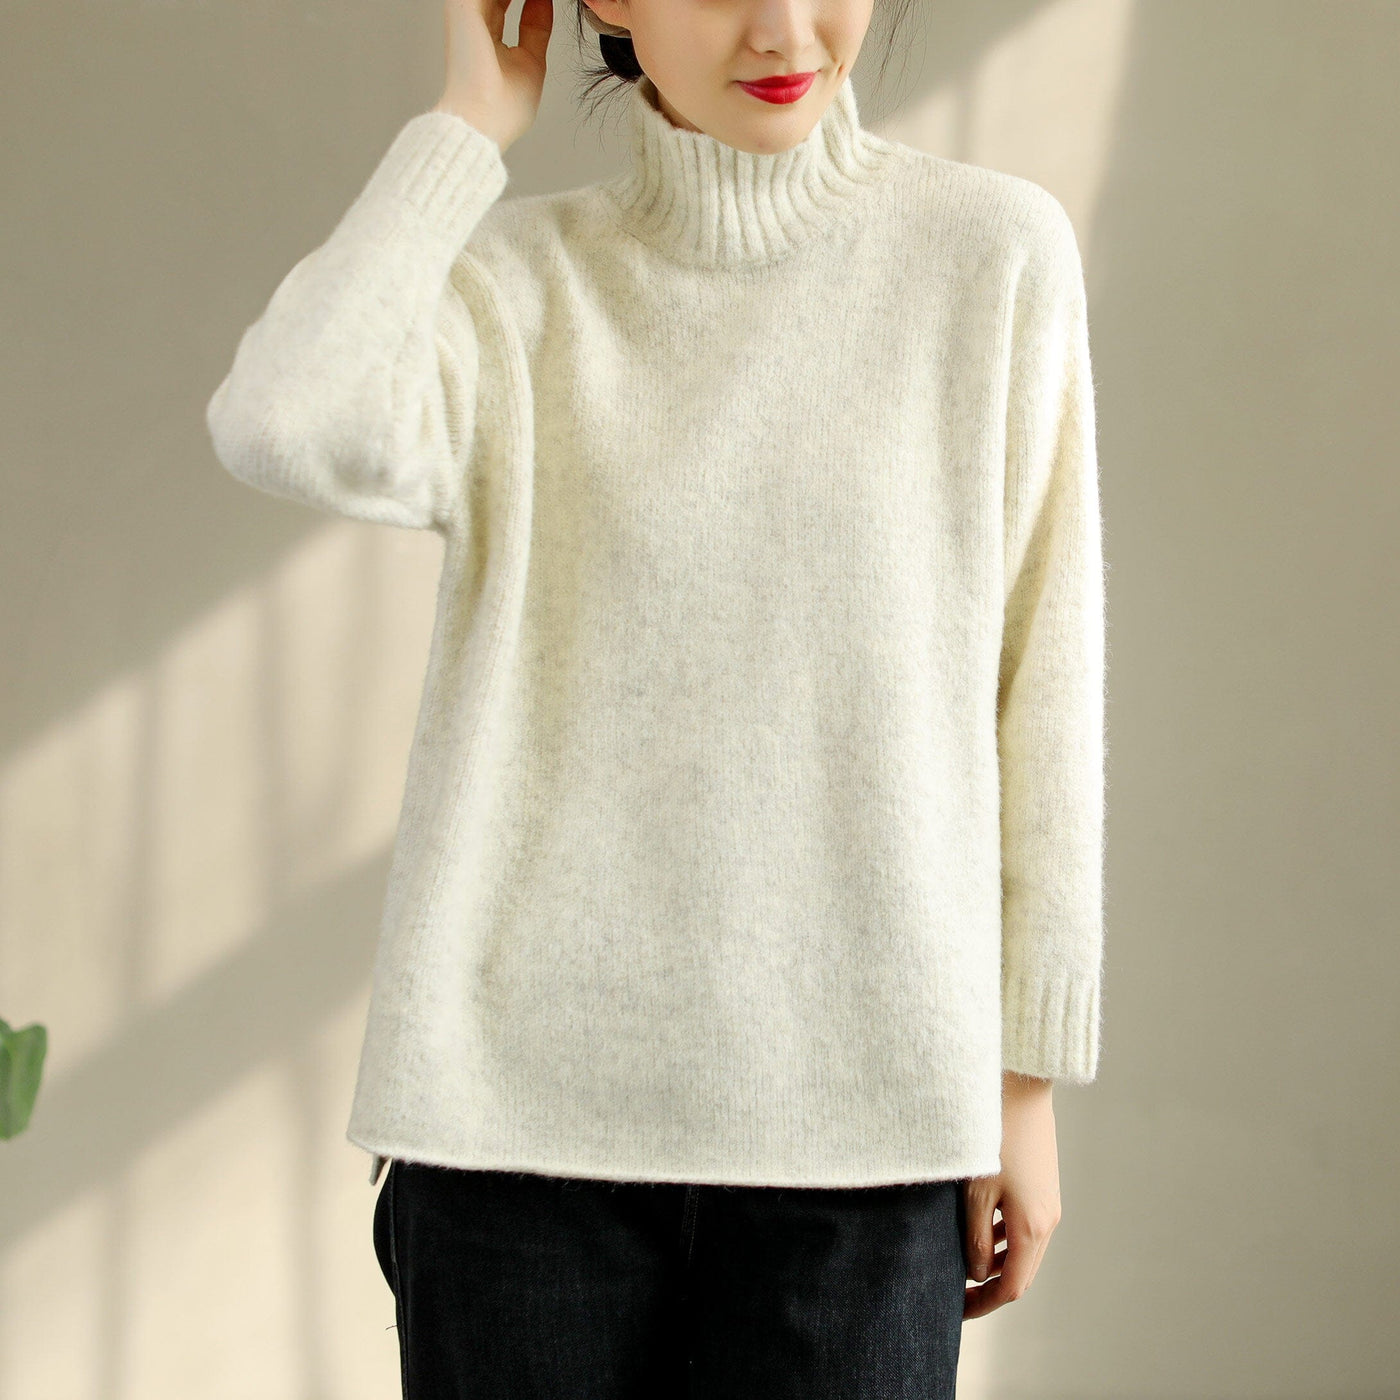 Women Autumn Winter Cotton Knitted Elastic Sweater Nov 2022 New Arrival One Size White 